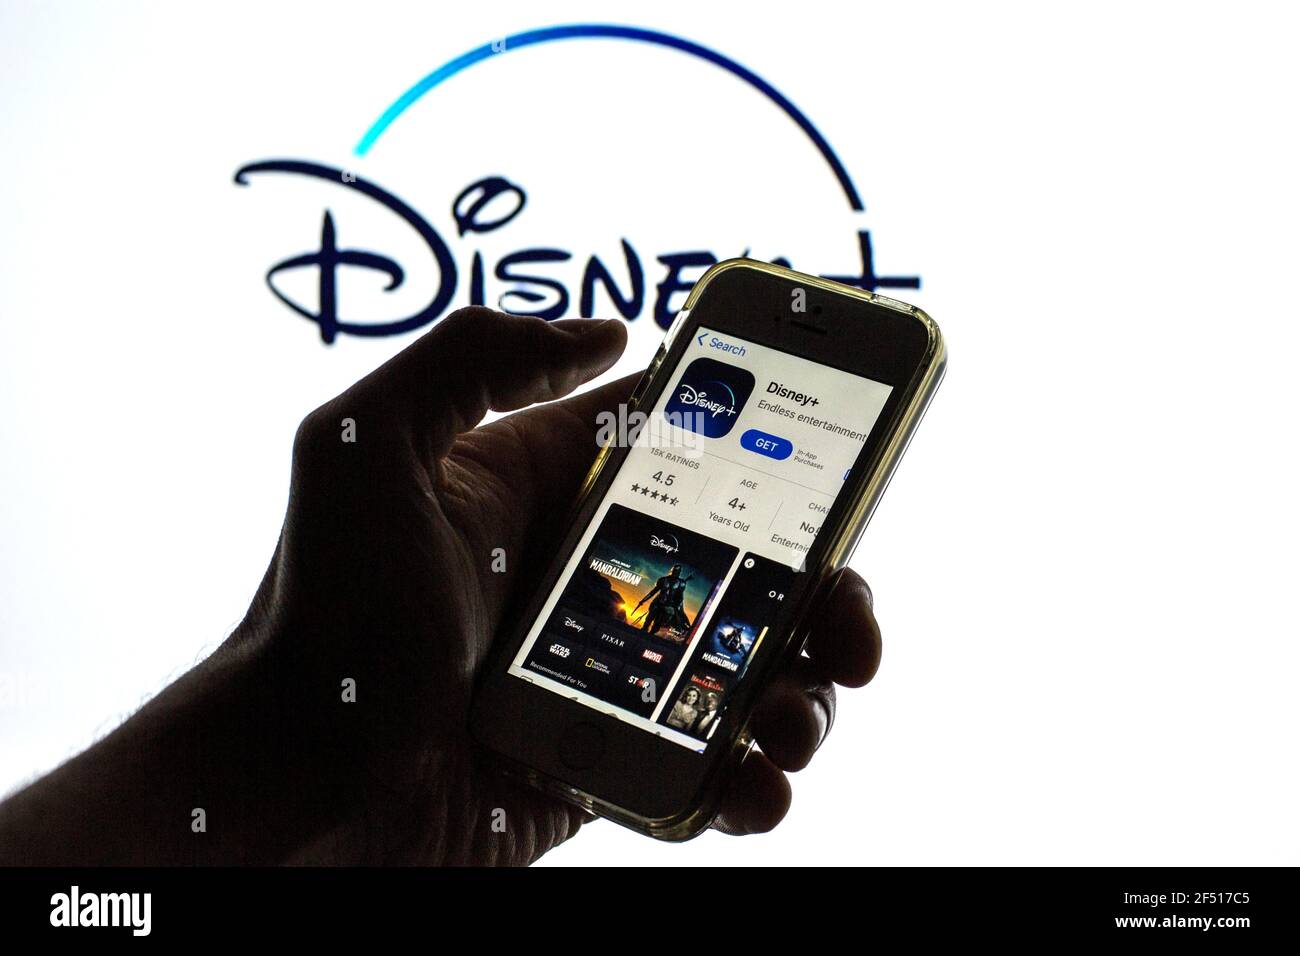 In this photo illustration the Disney+ App in App Store seen displayed on a smartphone screen and a Disney+ logo in the background Stock Photo